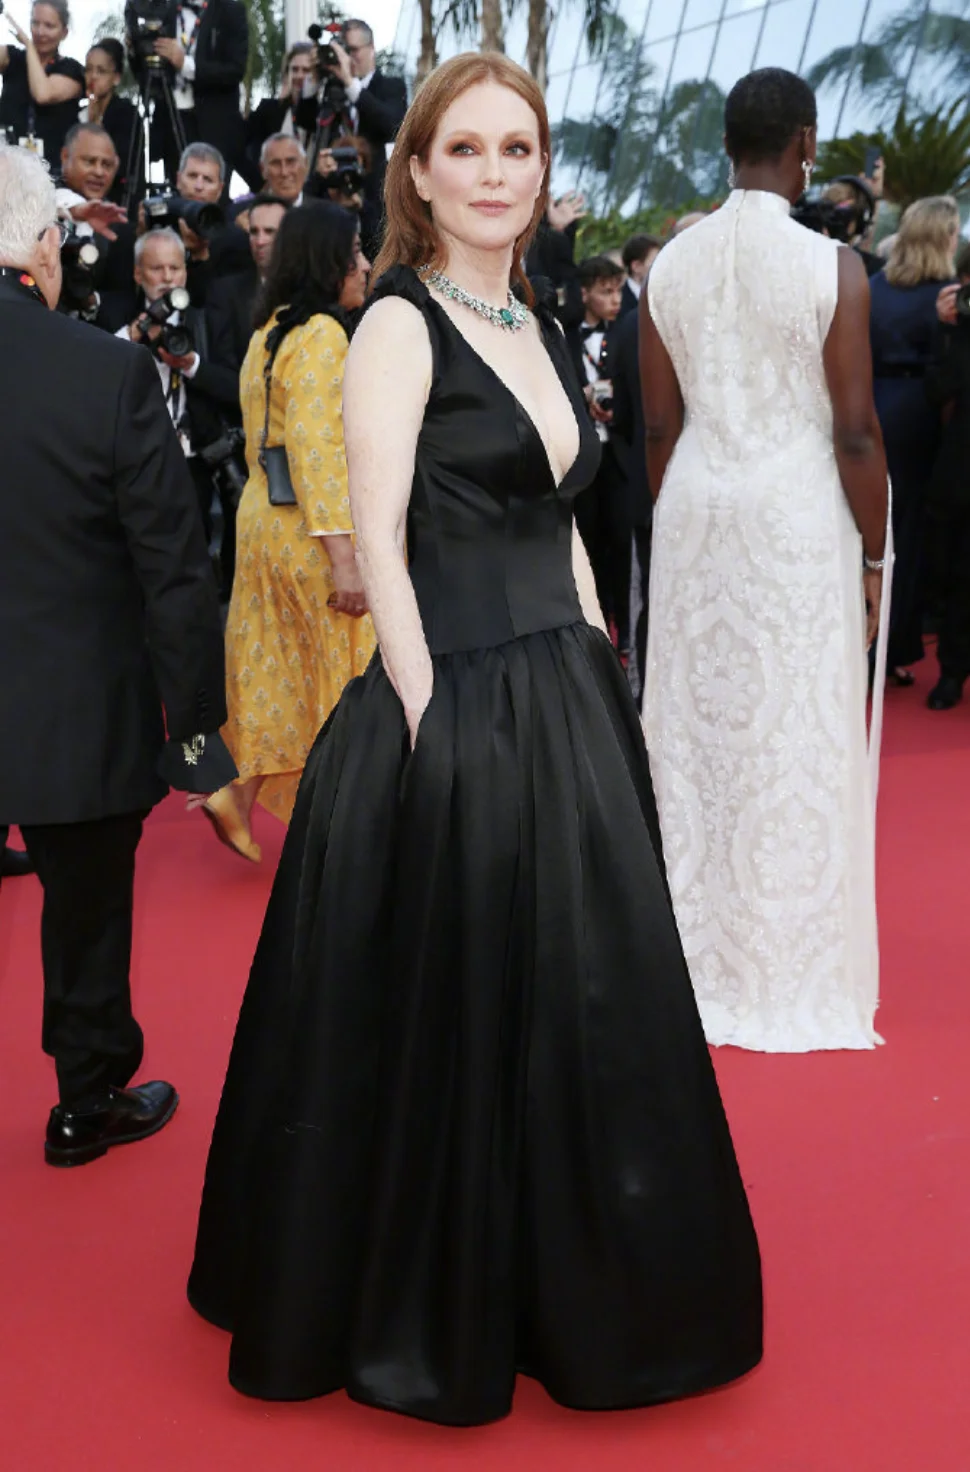 Julianne Moore on the red carpet at the Cannes Film Festival